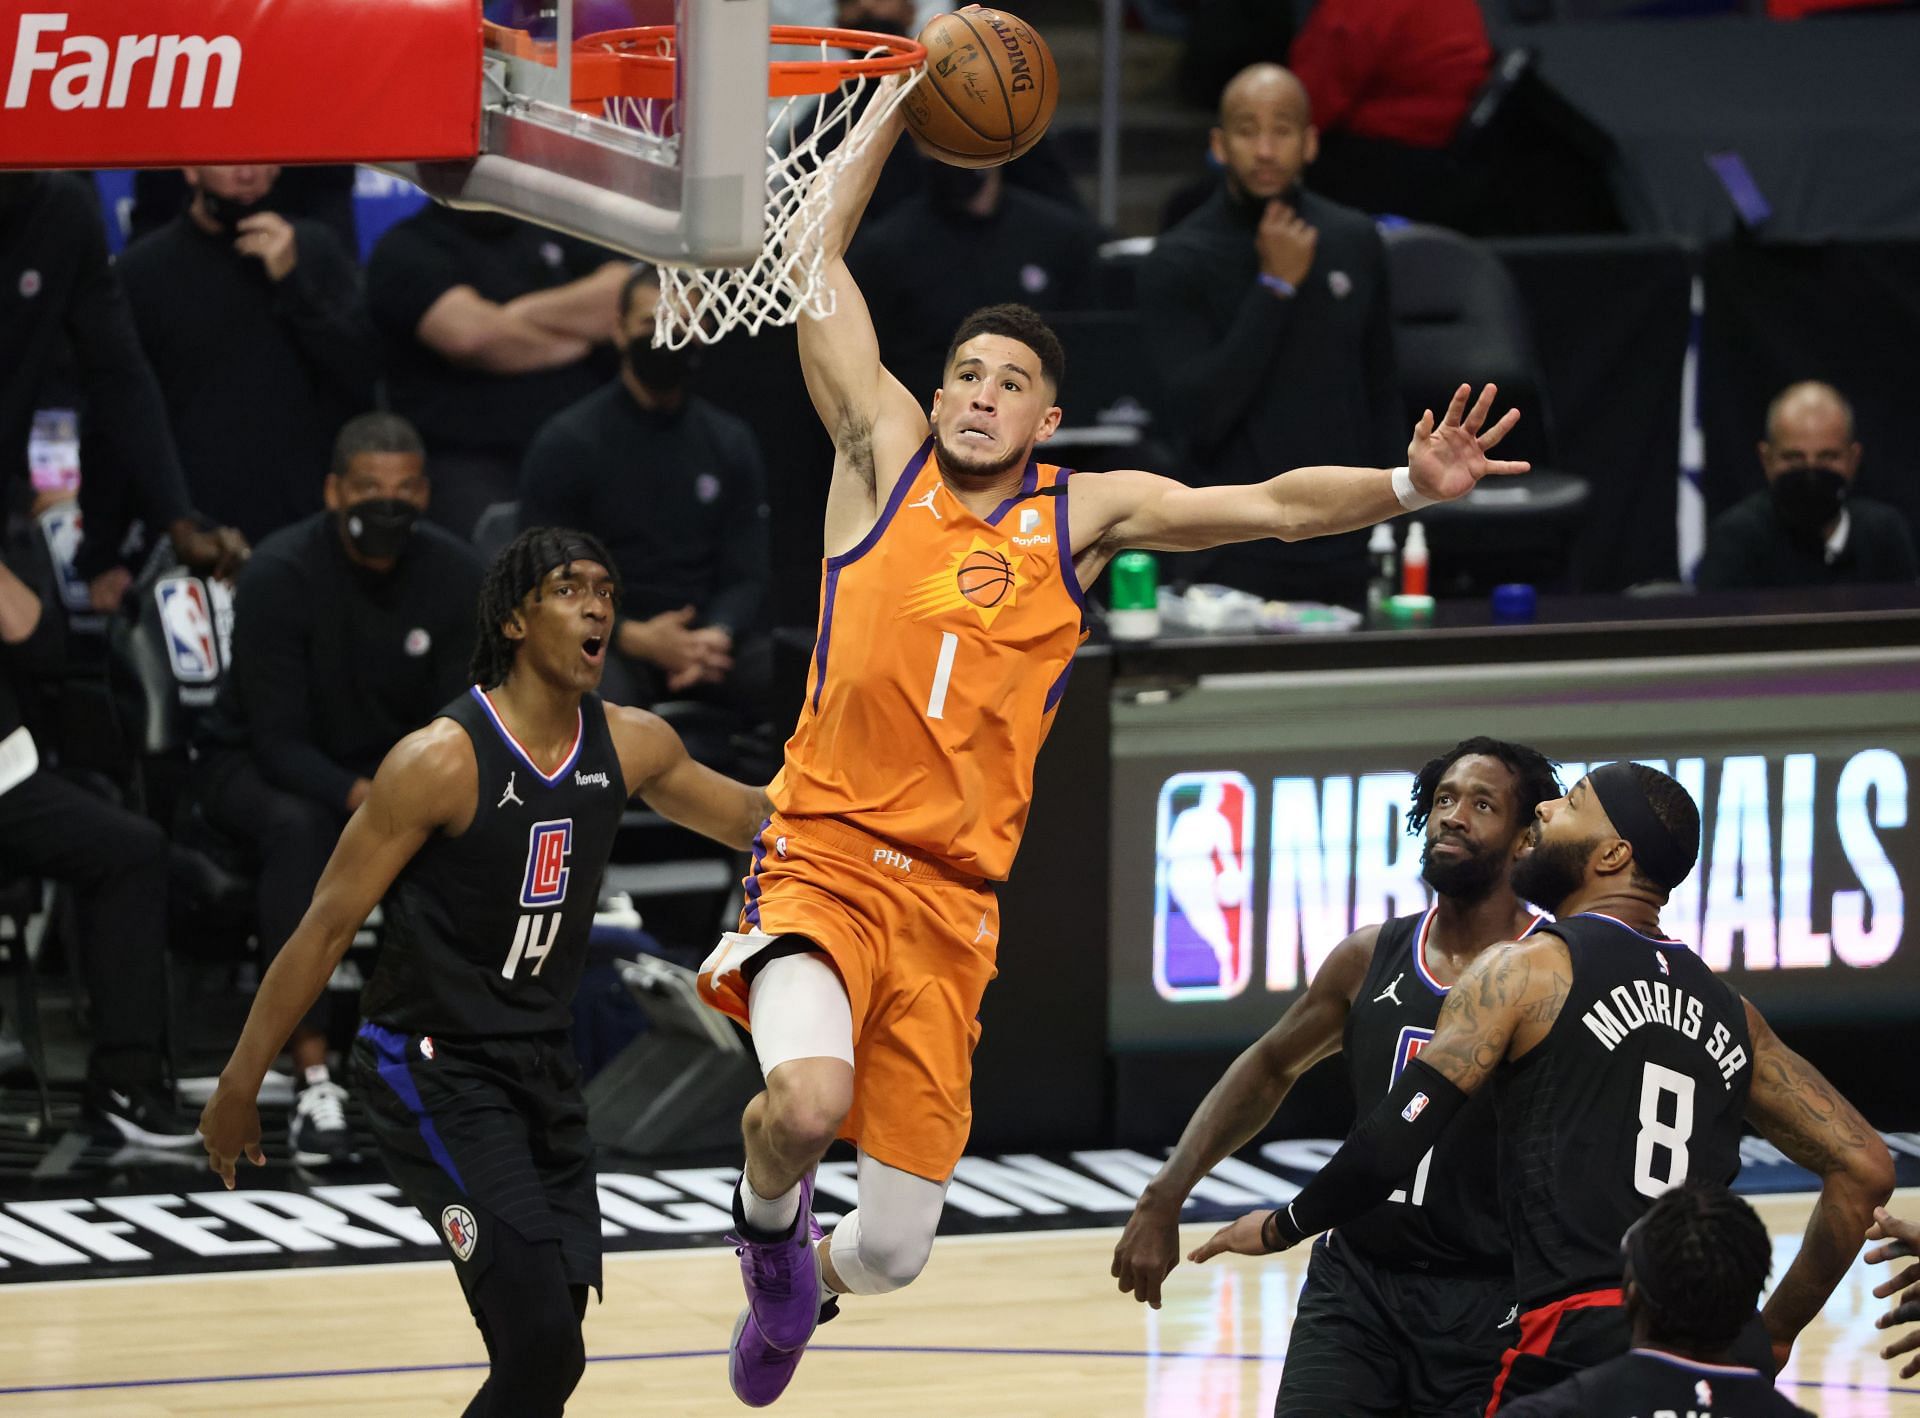 The Phoenix Suns will host the LA Clippers on February 15